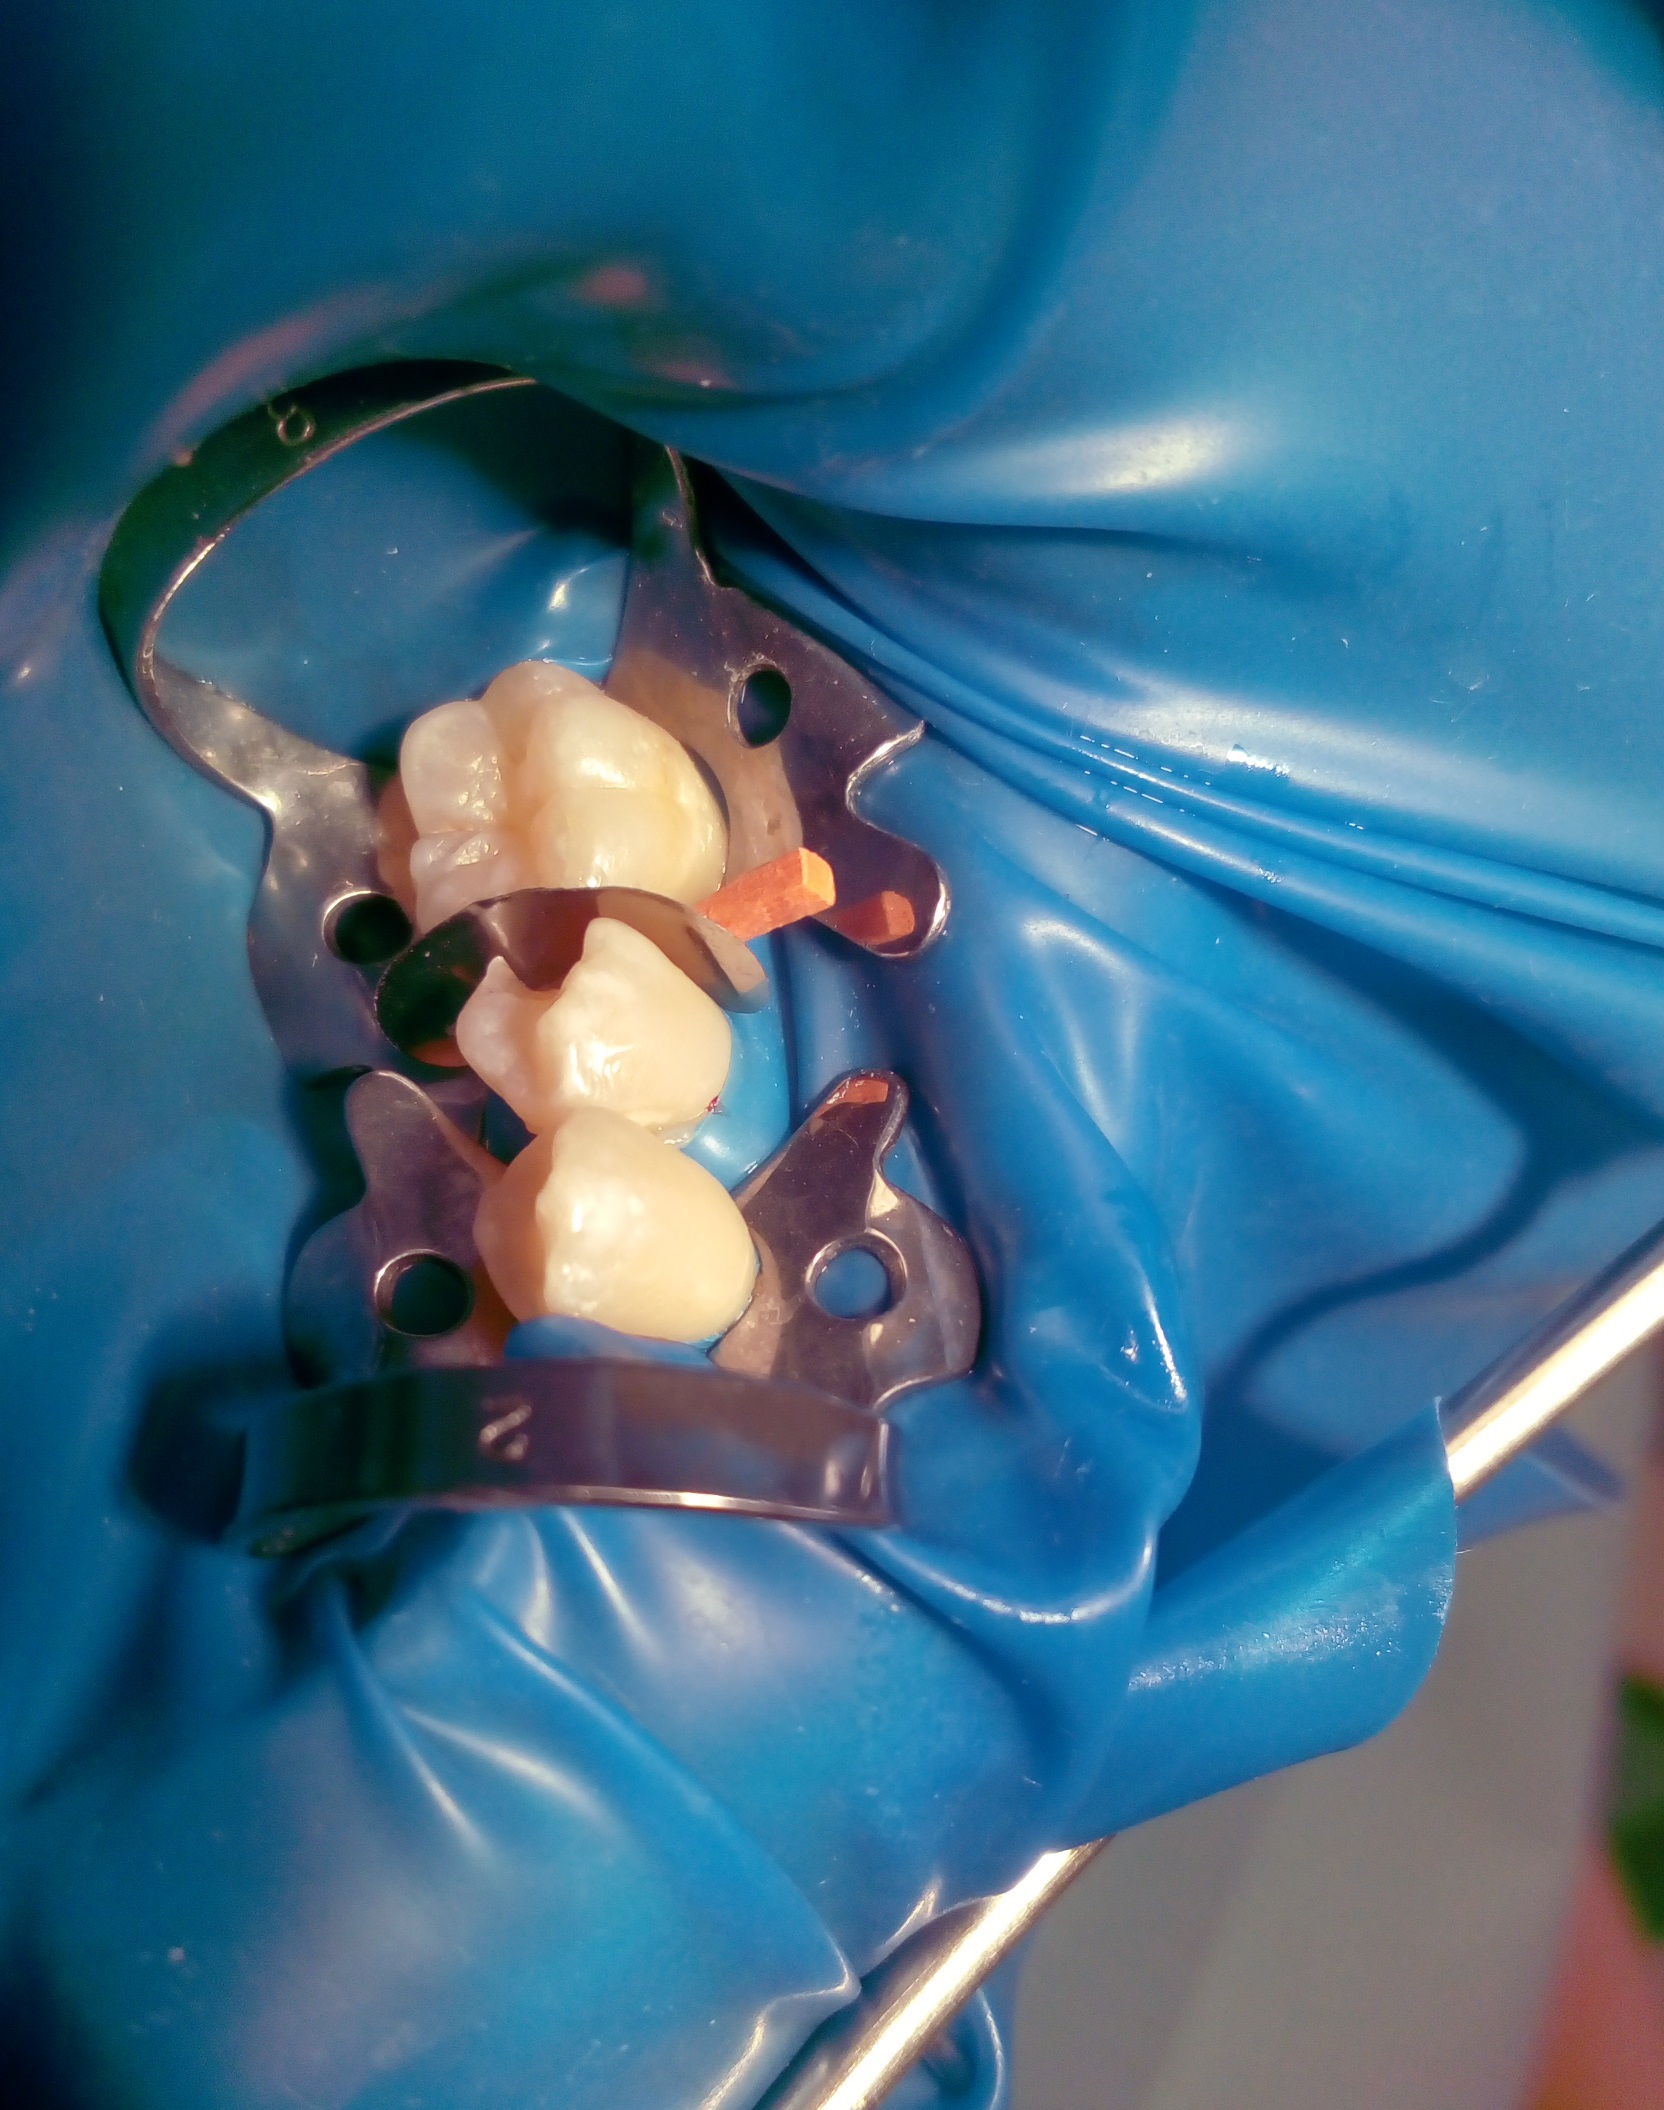 Conservative tooth decay treatment by composite fillings